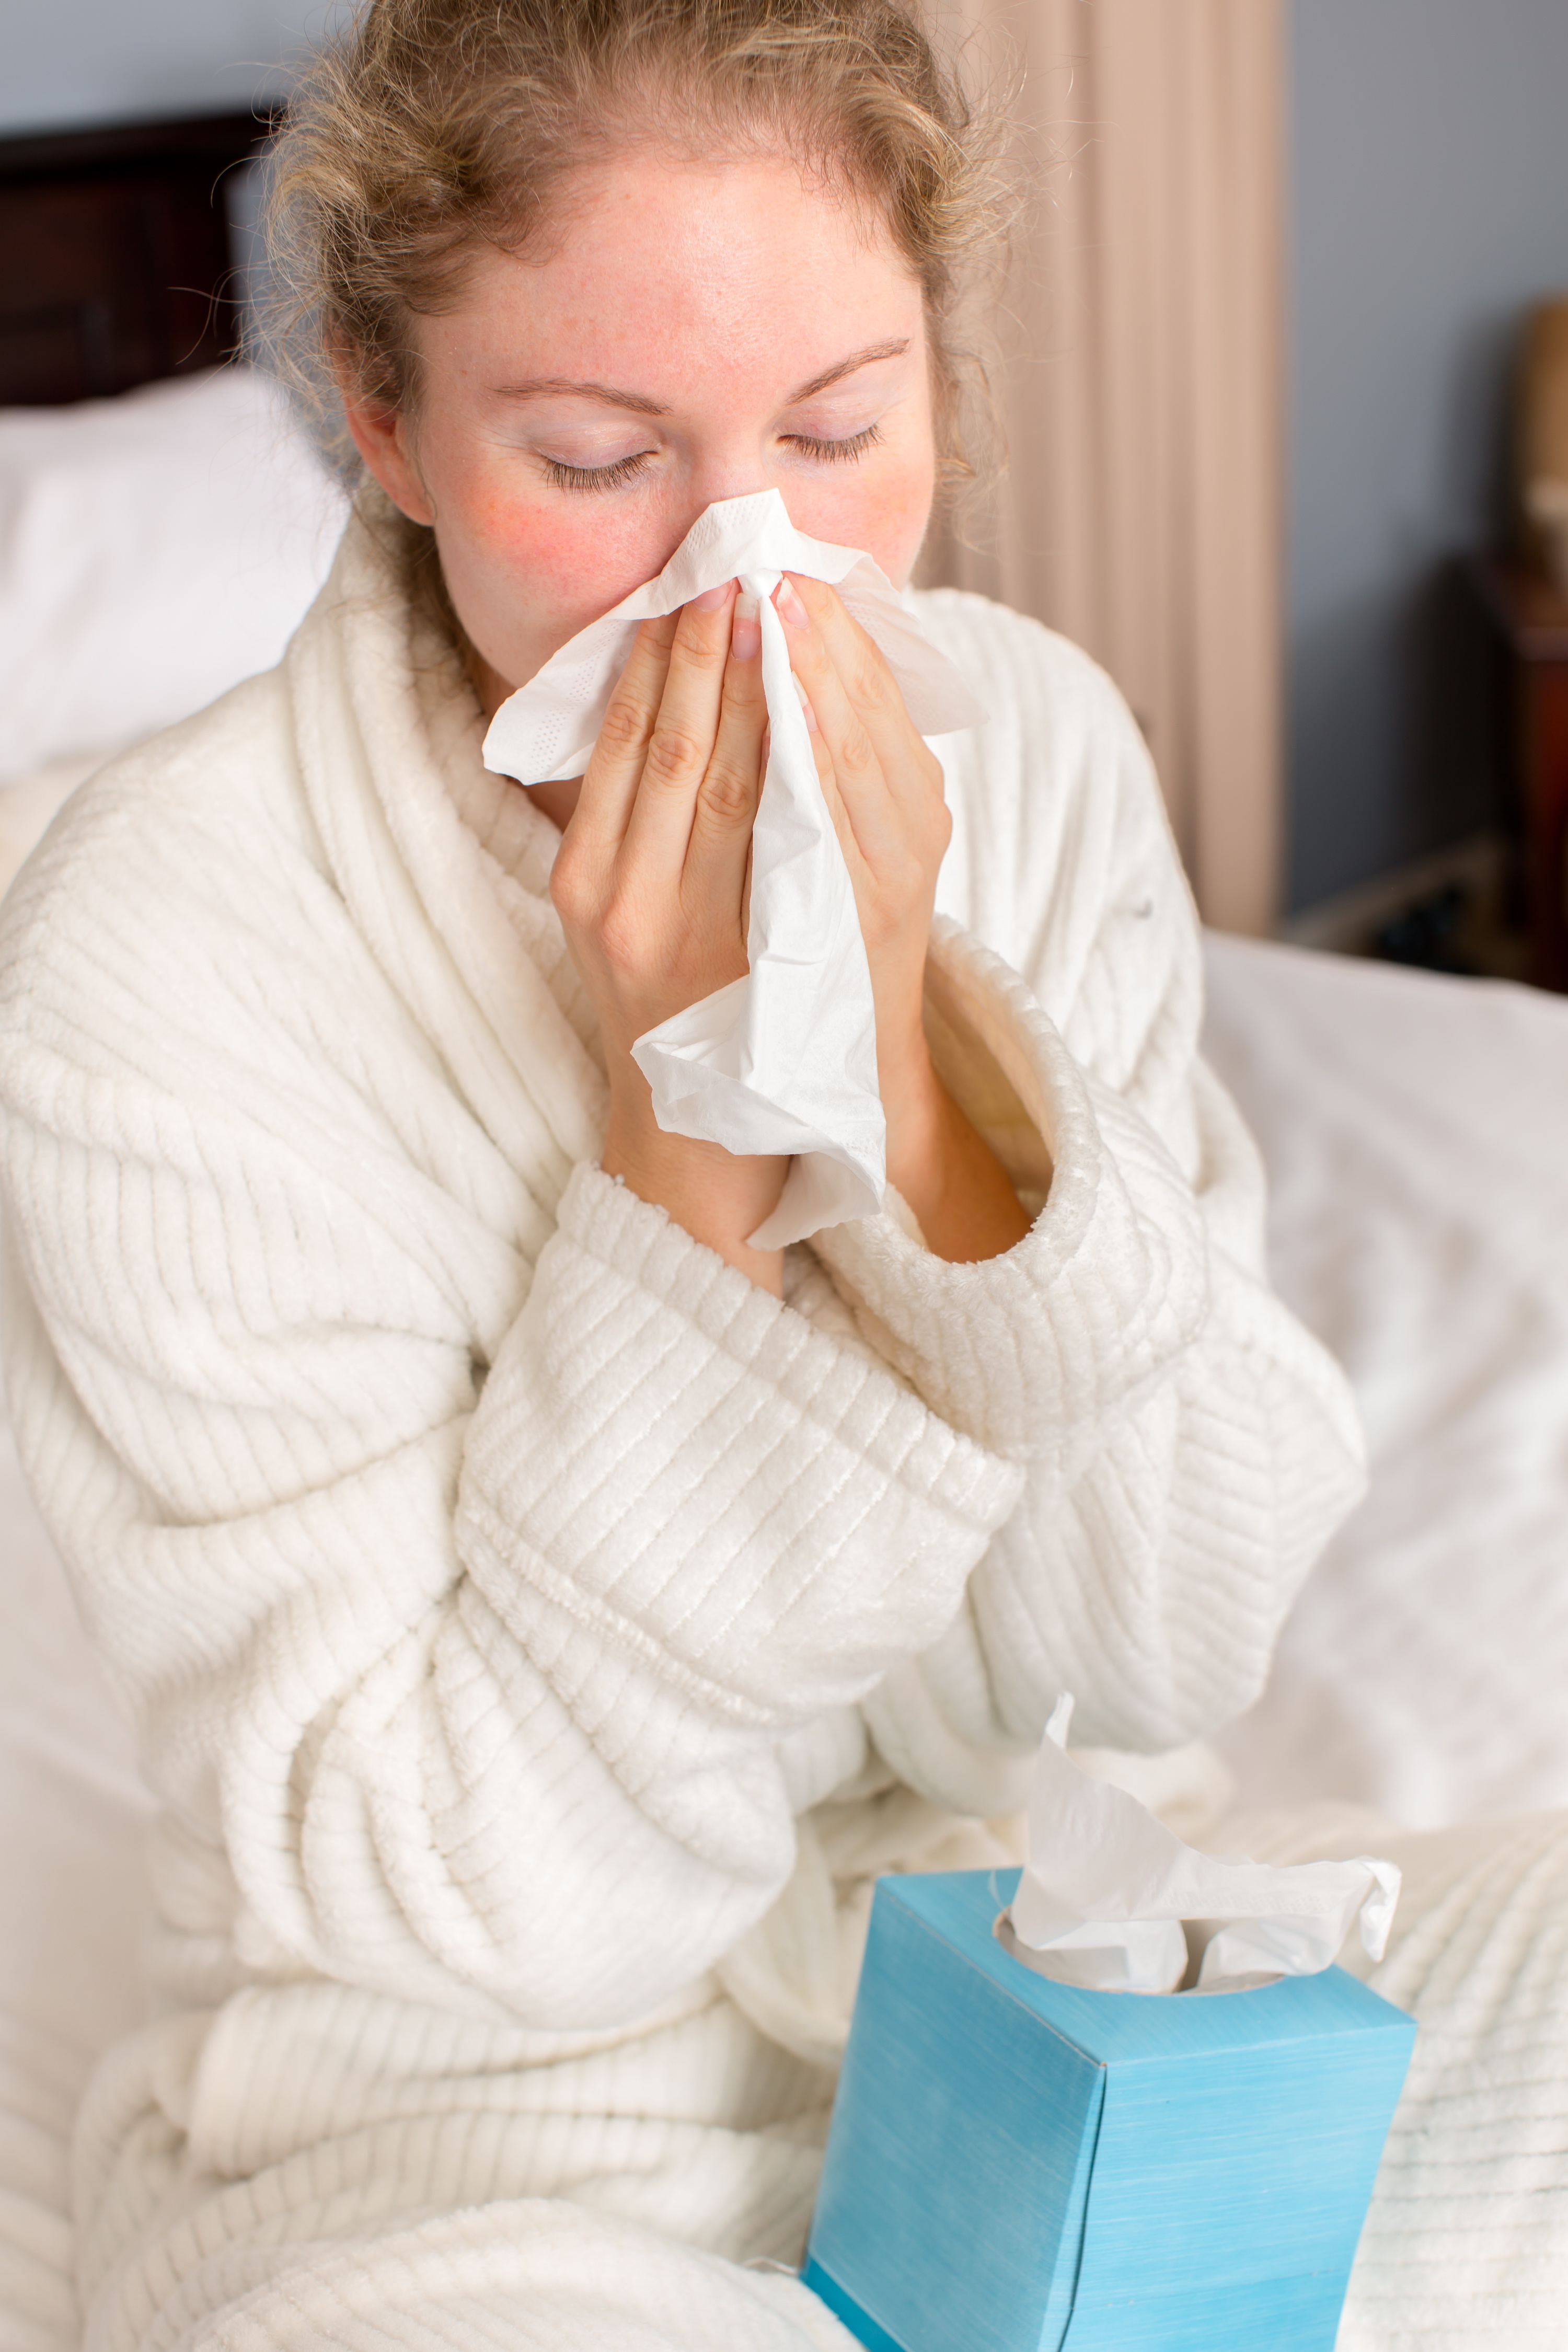 Can't sleep because of seasonal allergies? Reasons and solutions